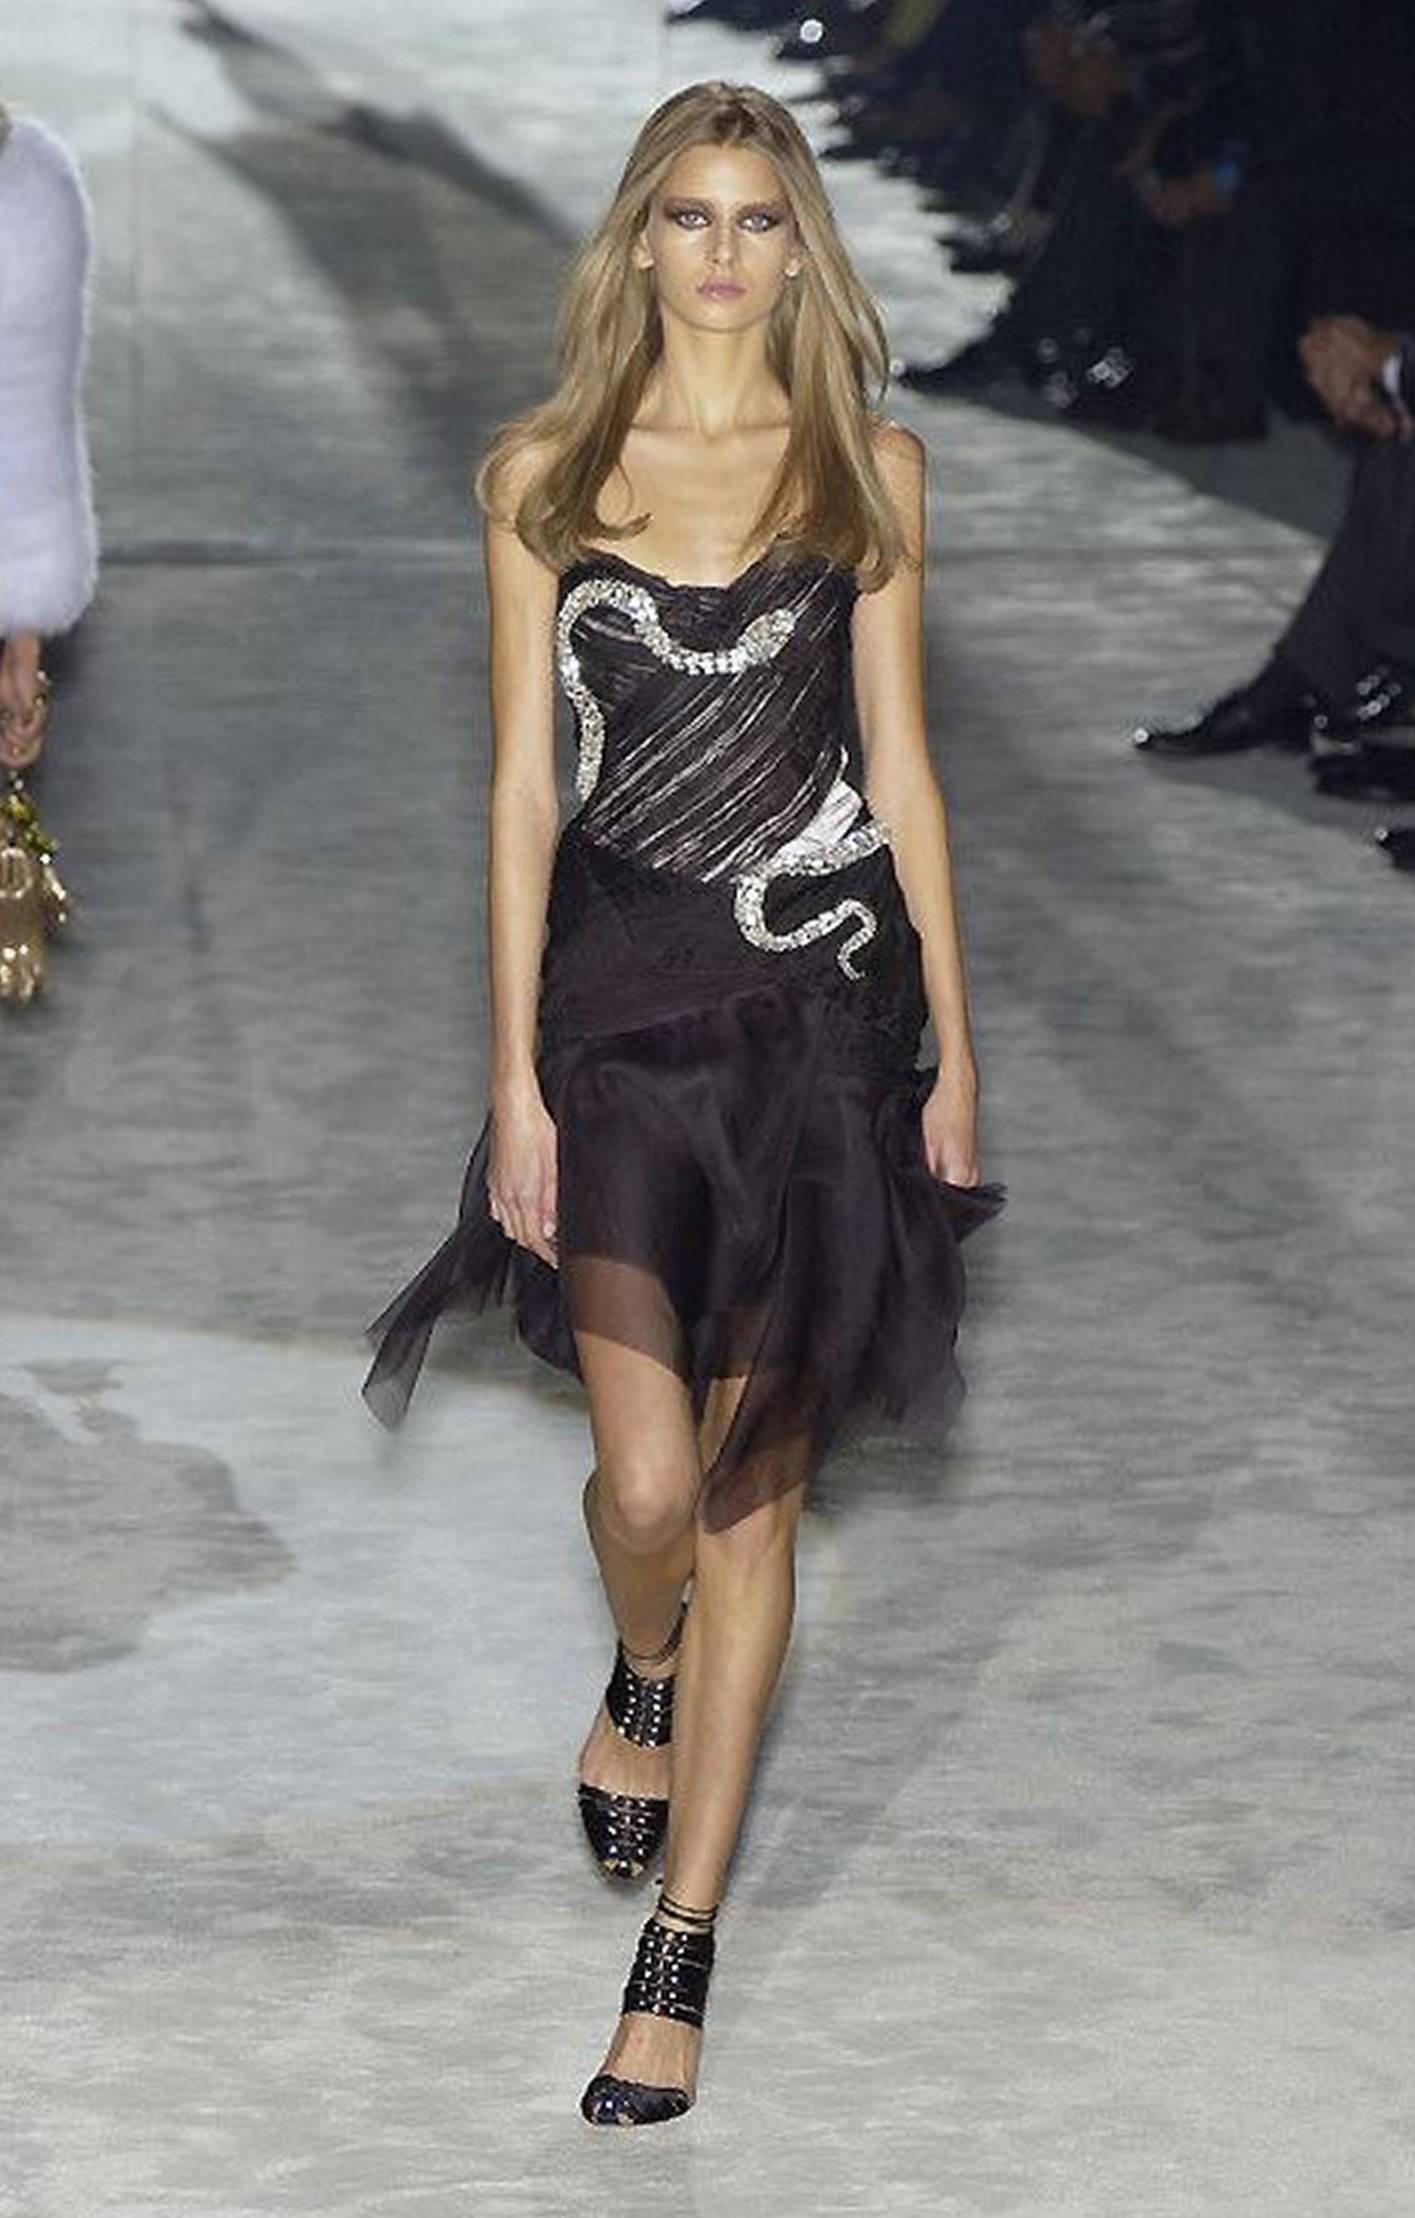 Breathtaking and extremely rare 2004 Gucci runway finale dress by famous designer Tom Ford. This iconic show-stopper is fashioned from the highest quality black silk-organza. I adore the intricate pintucking and seductive nude illusion effect. The